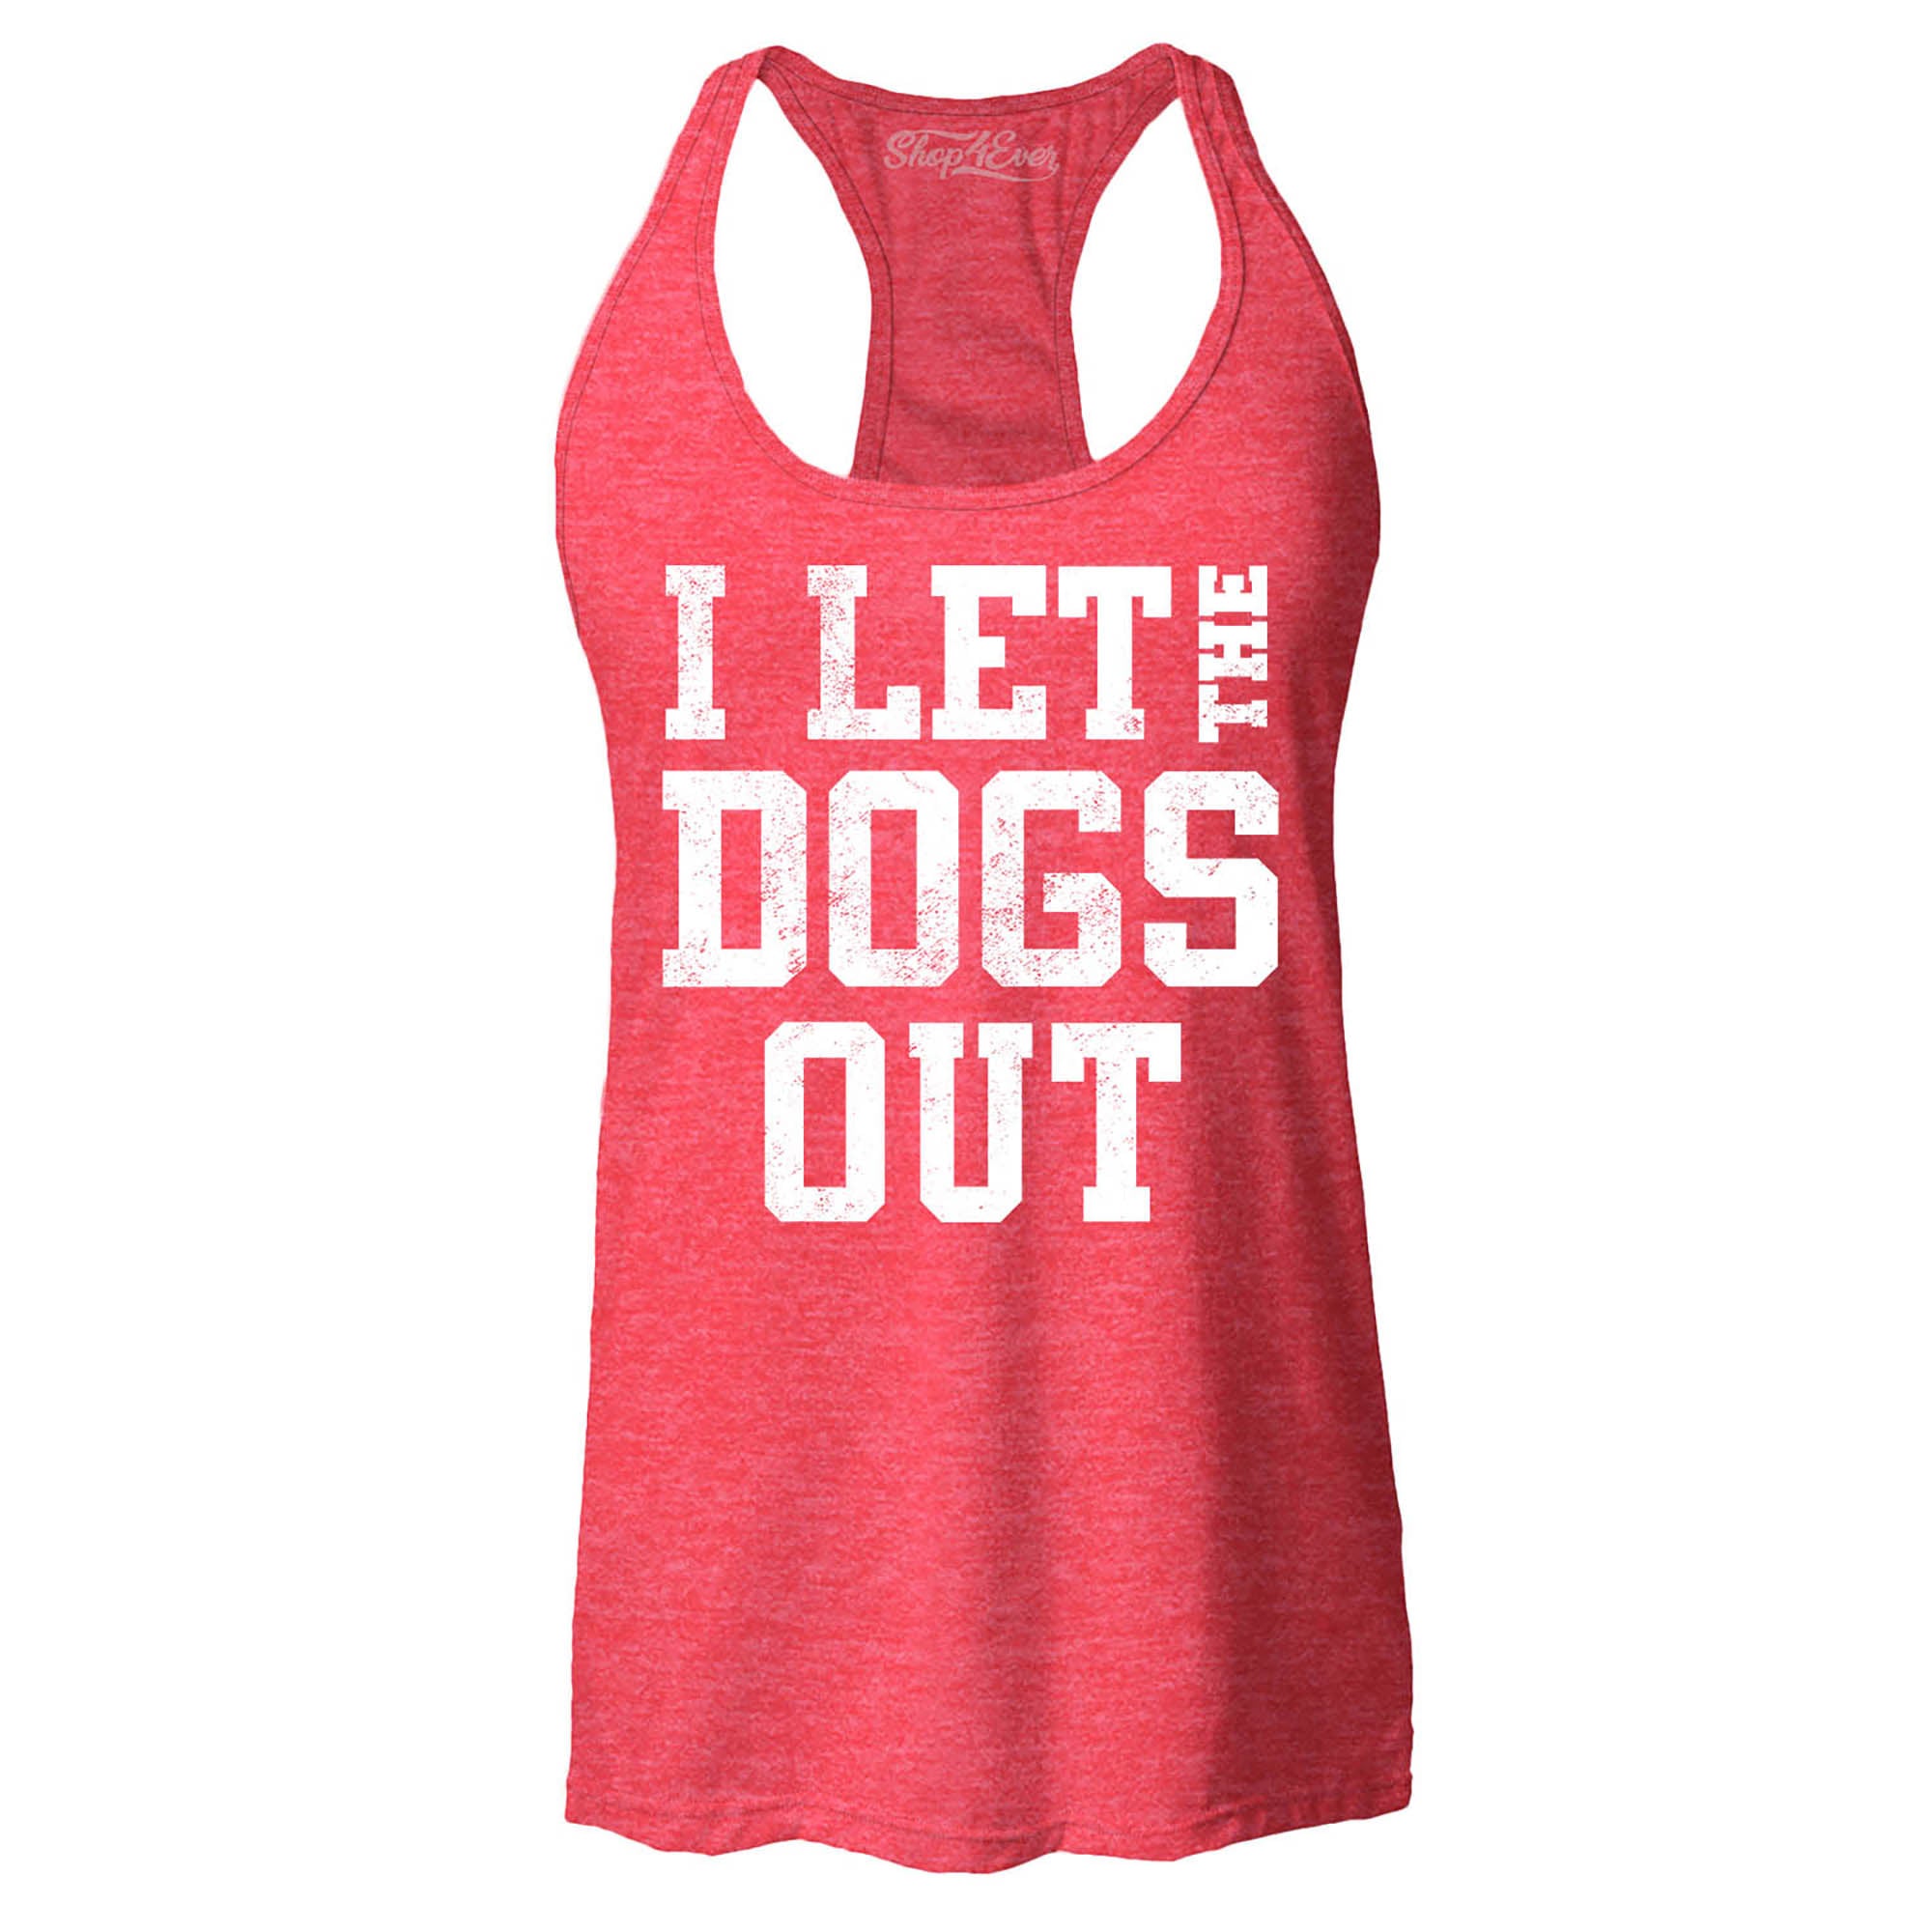 I Let The Dogs Out Women's Racerback Tank Top Slim Fit